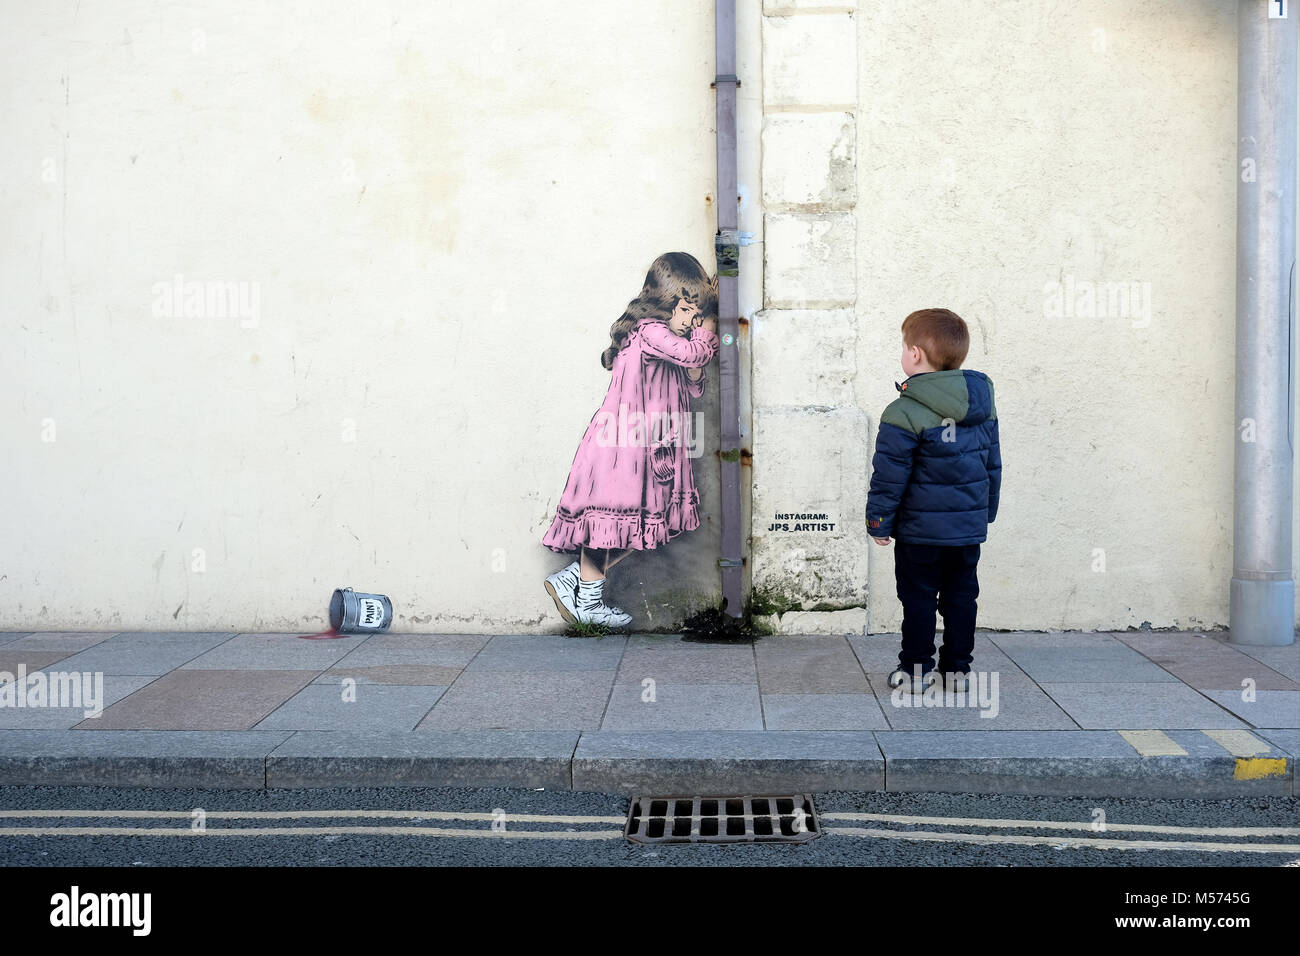 A young boy looks at a banksy style graffiti artwork of a young girl crying over a spilled tin of paint. The artworkby JPS and titled Spilled Anarchy Stock Photo